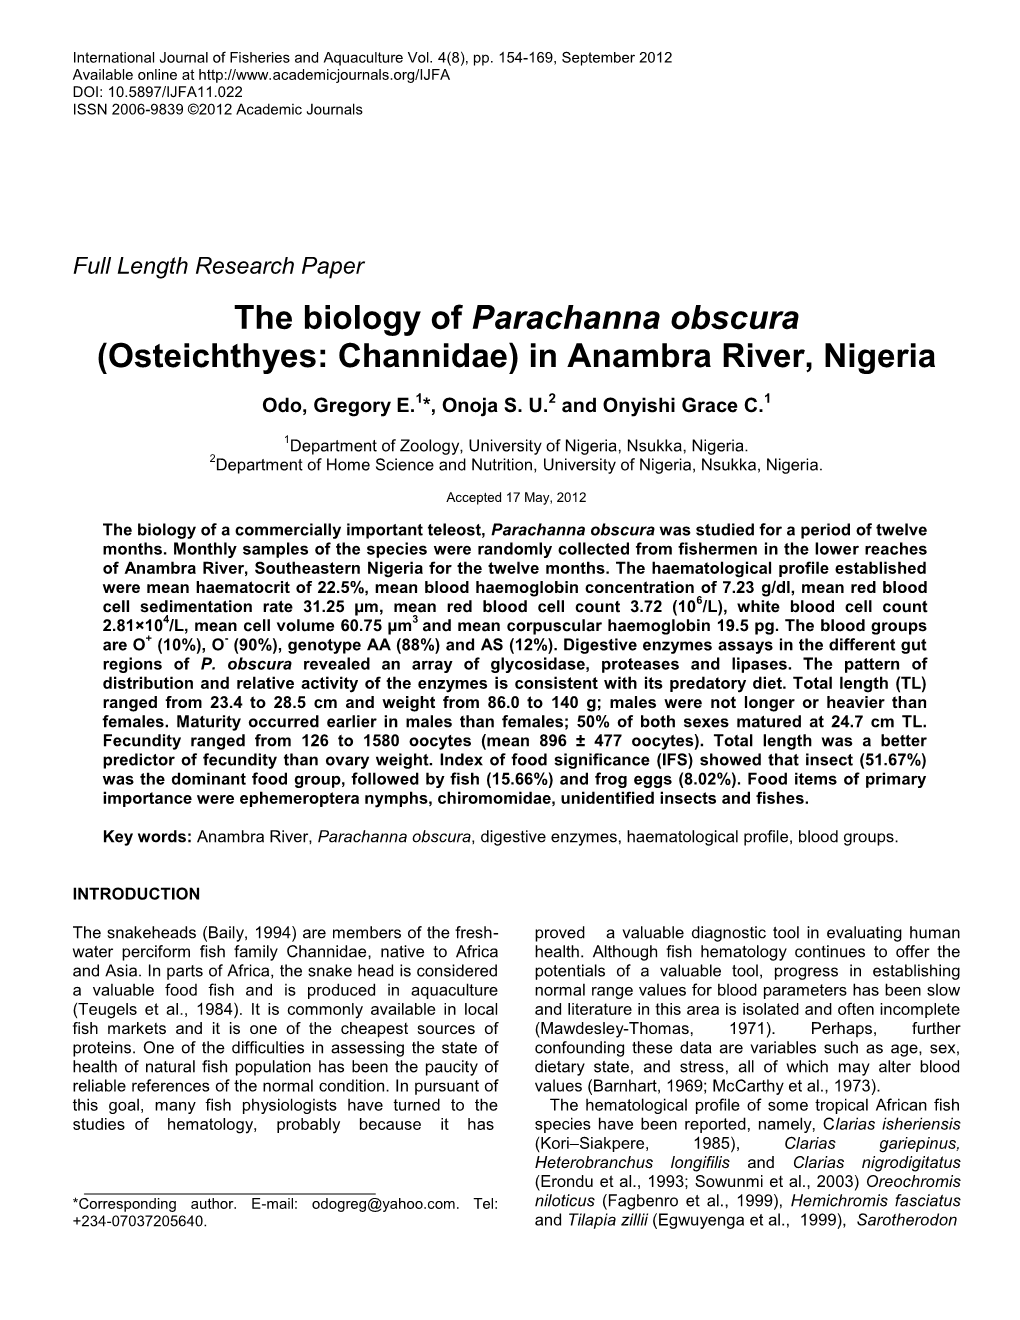 The Biology of Parachanna Obscura (Osteichthyes: Channidae) in Anambra River, Nigeria